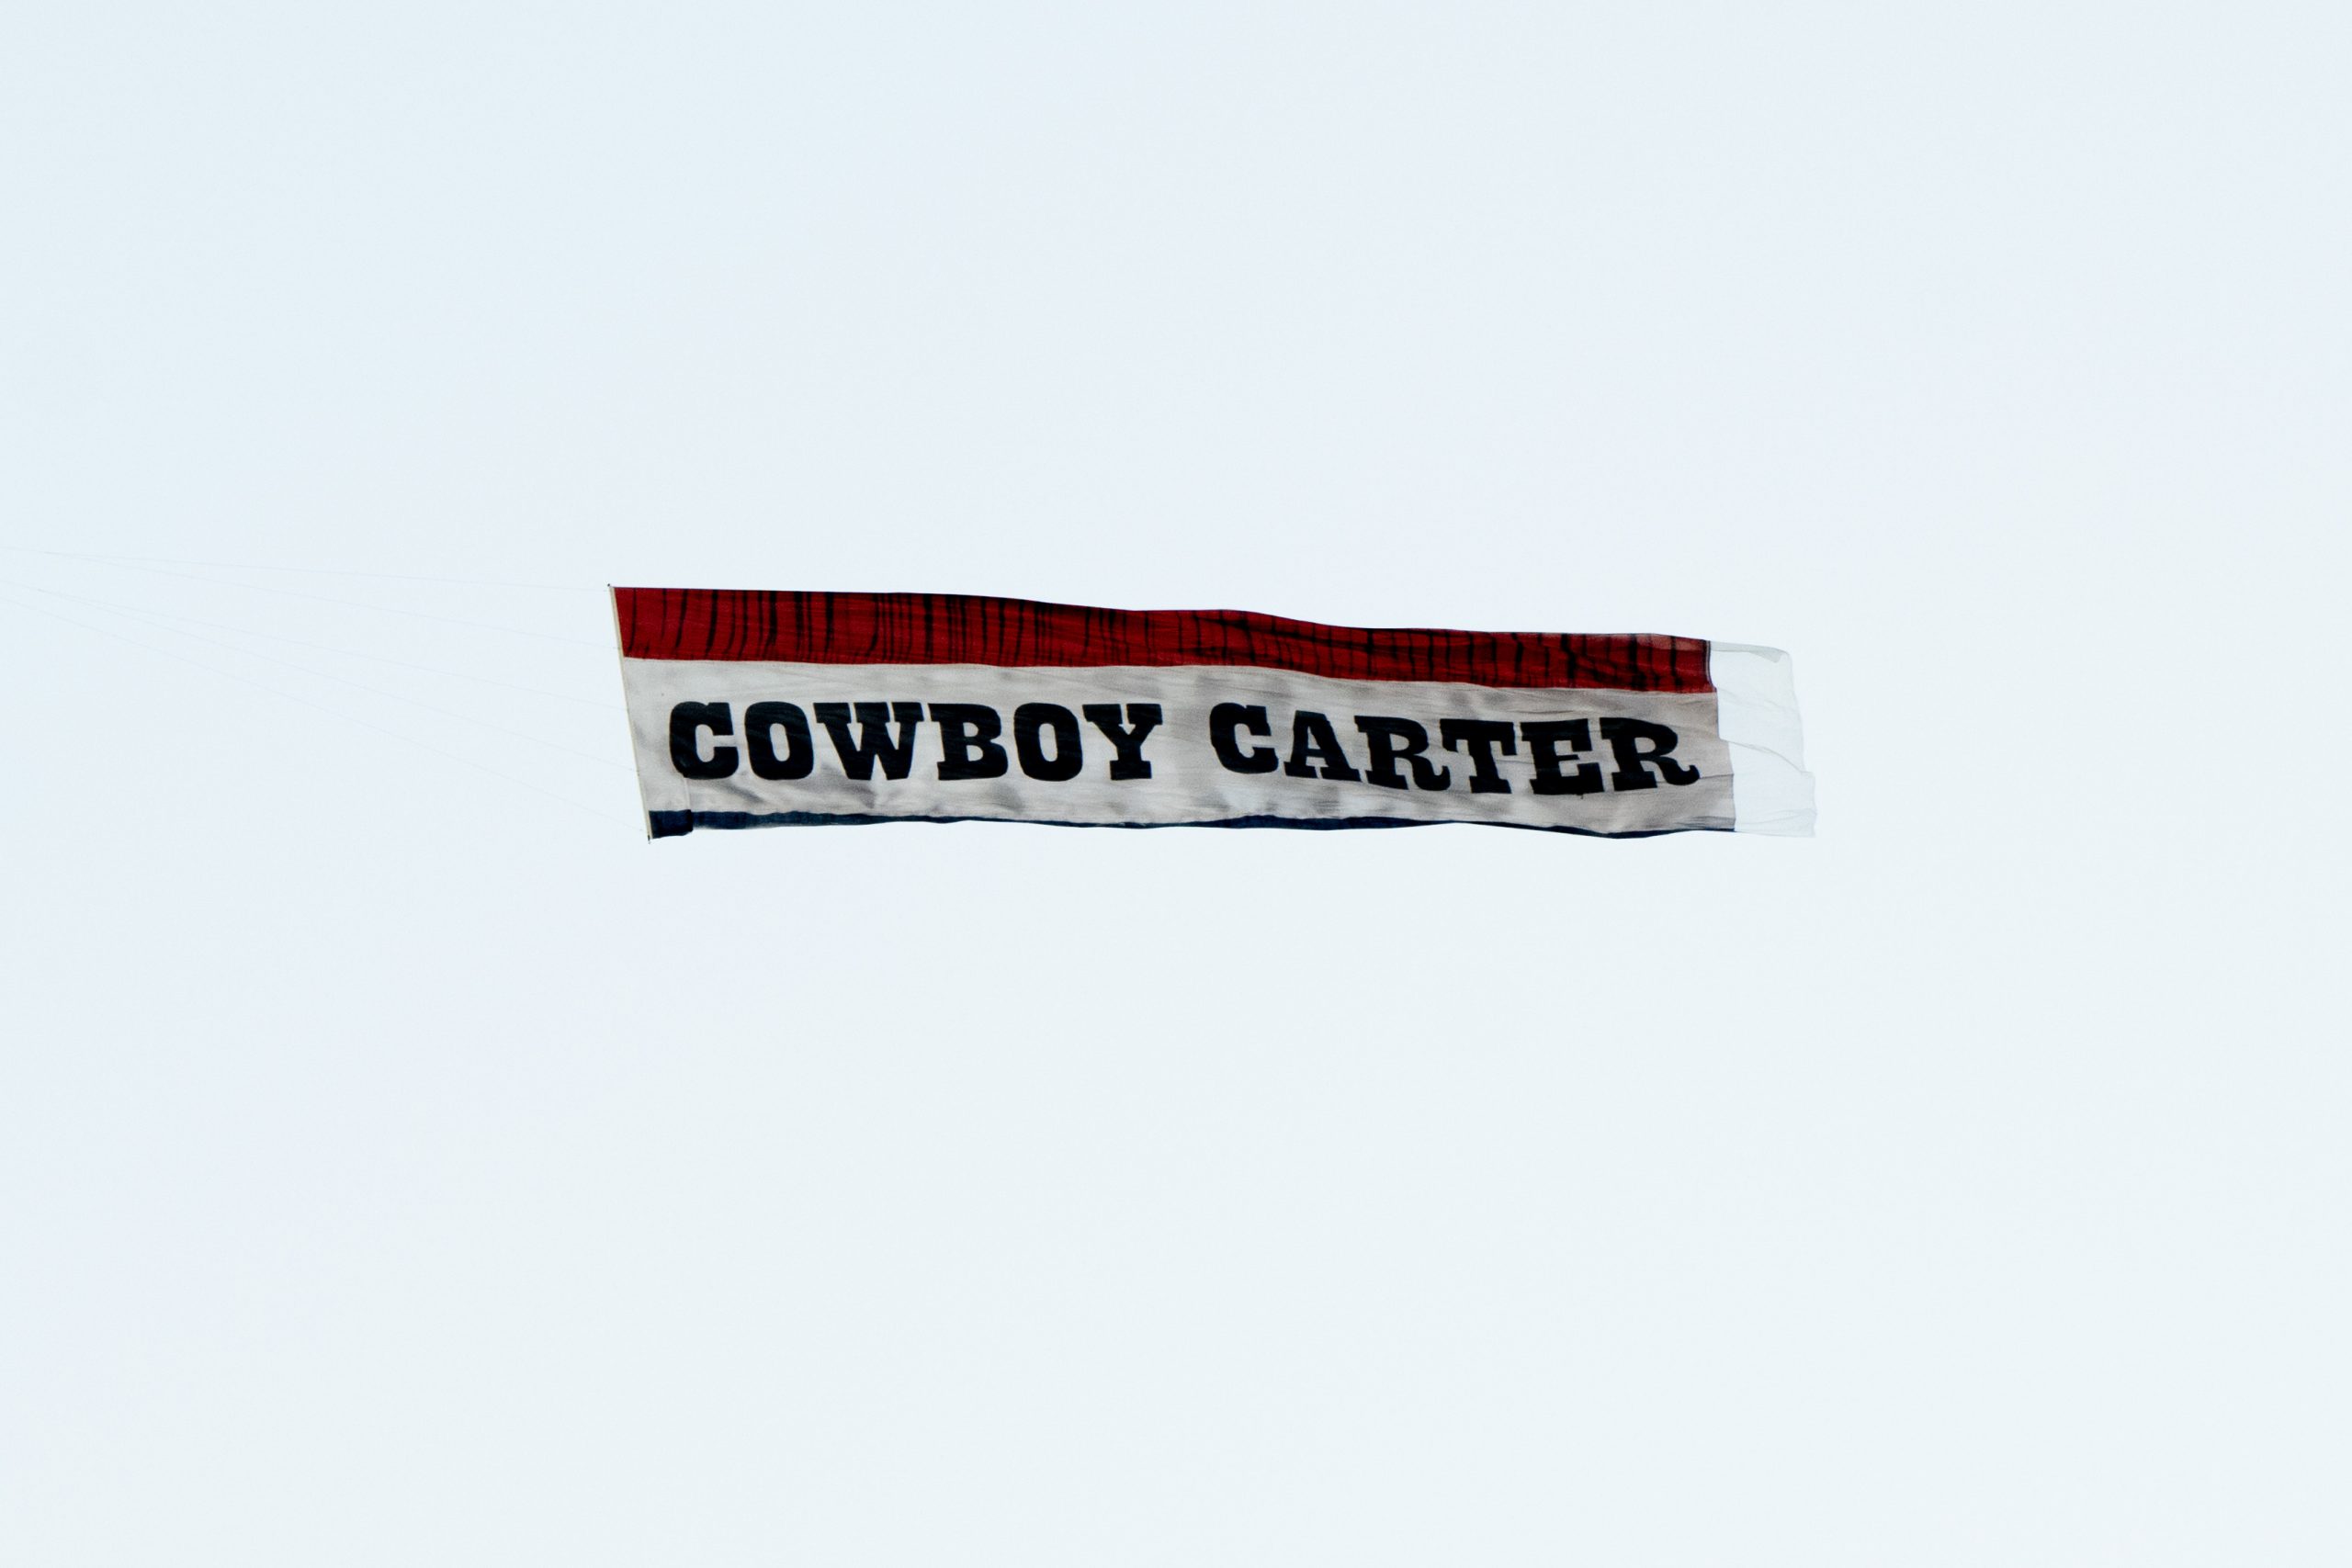 A banner promoting Beyonce "Cowboy Carter" is seen overhead during Day 2 of Stagecoach Festival at Empire Polo Club on April 27, 2024 in Indio, California.